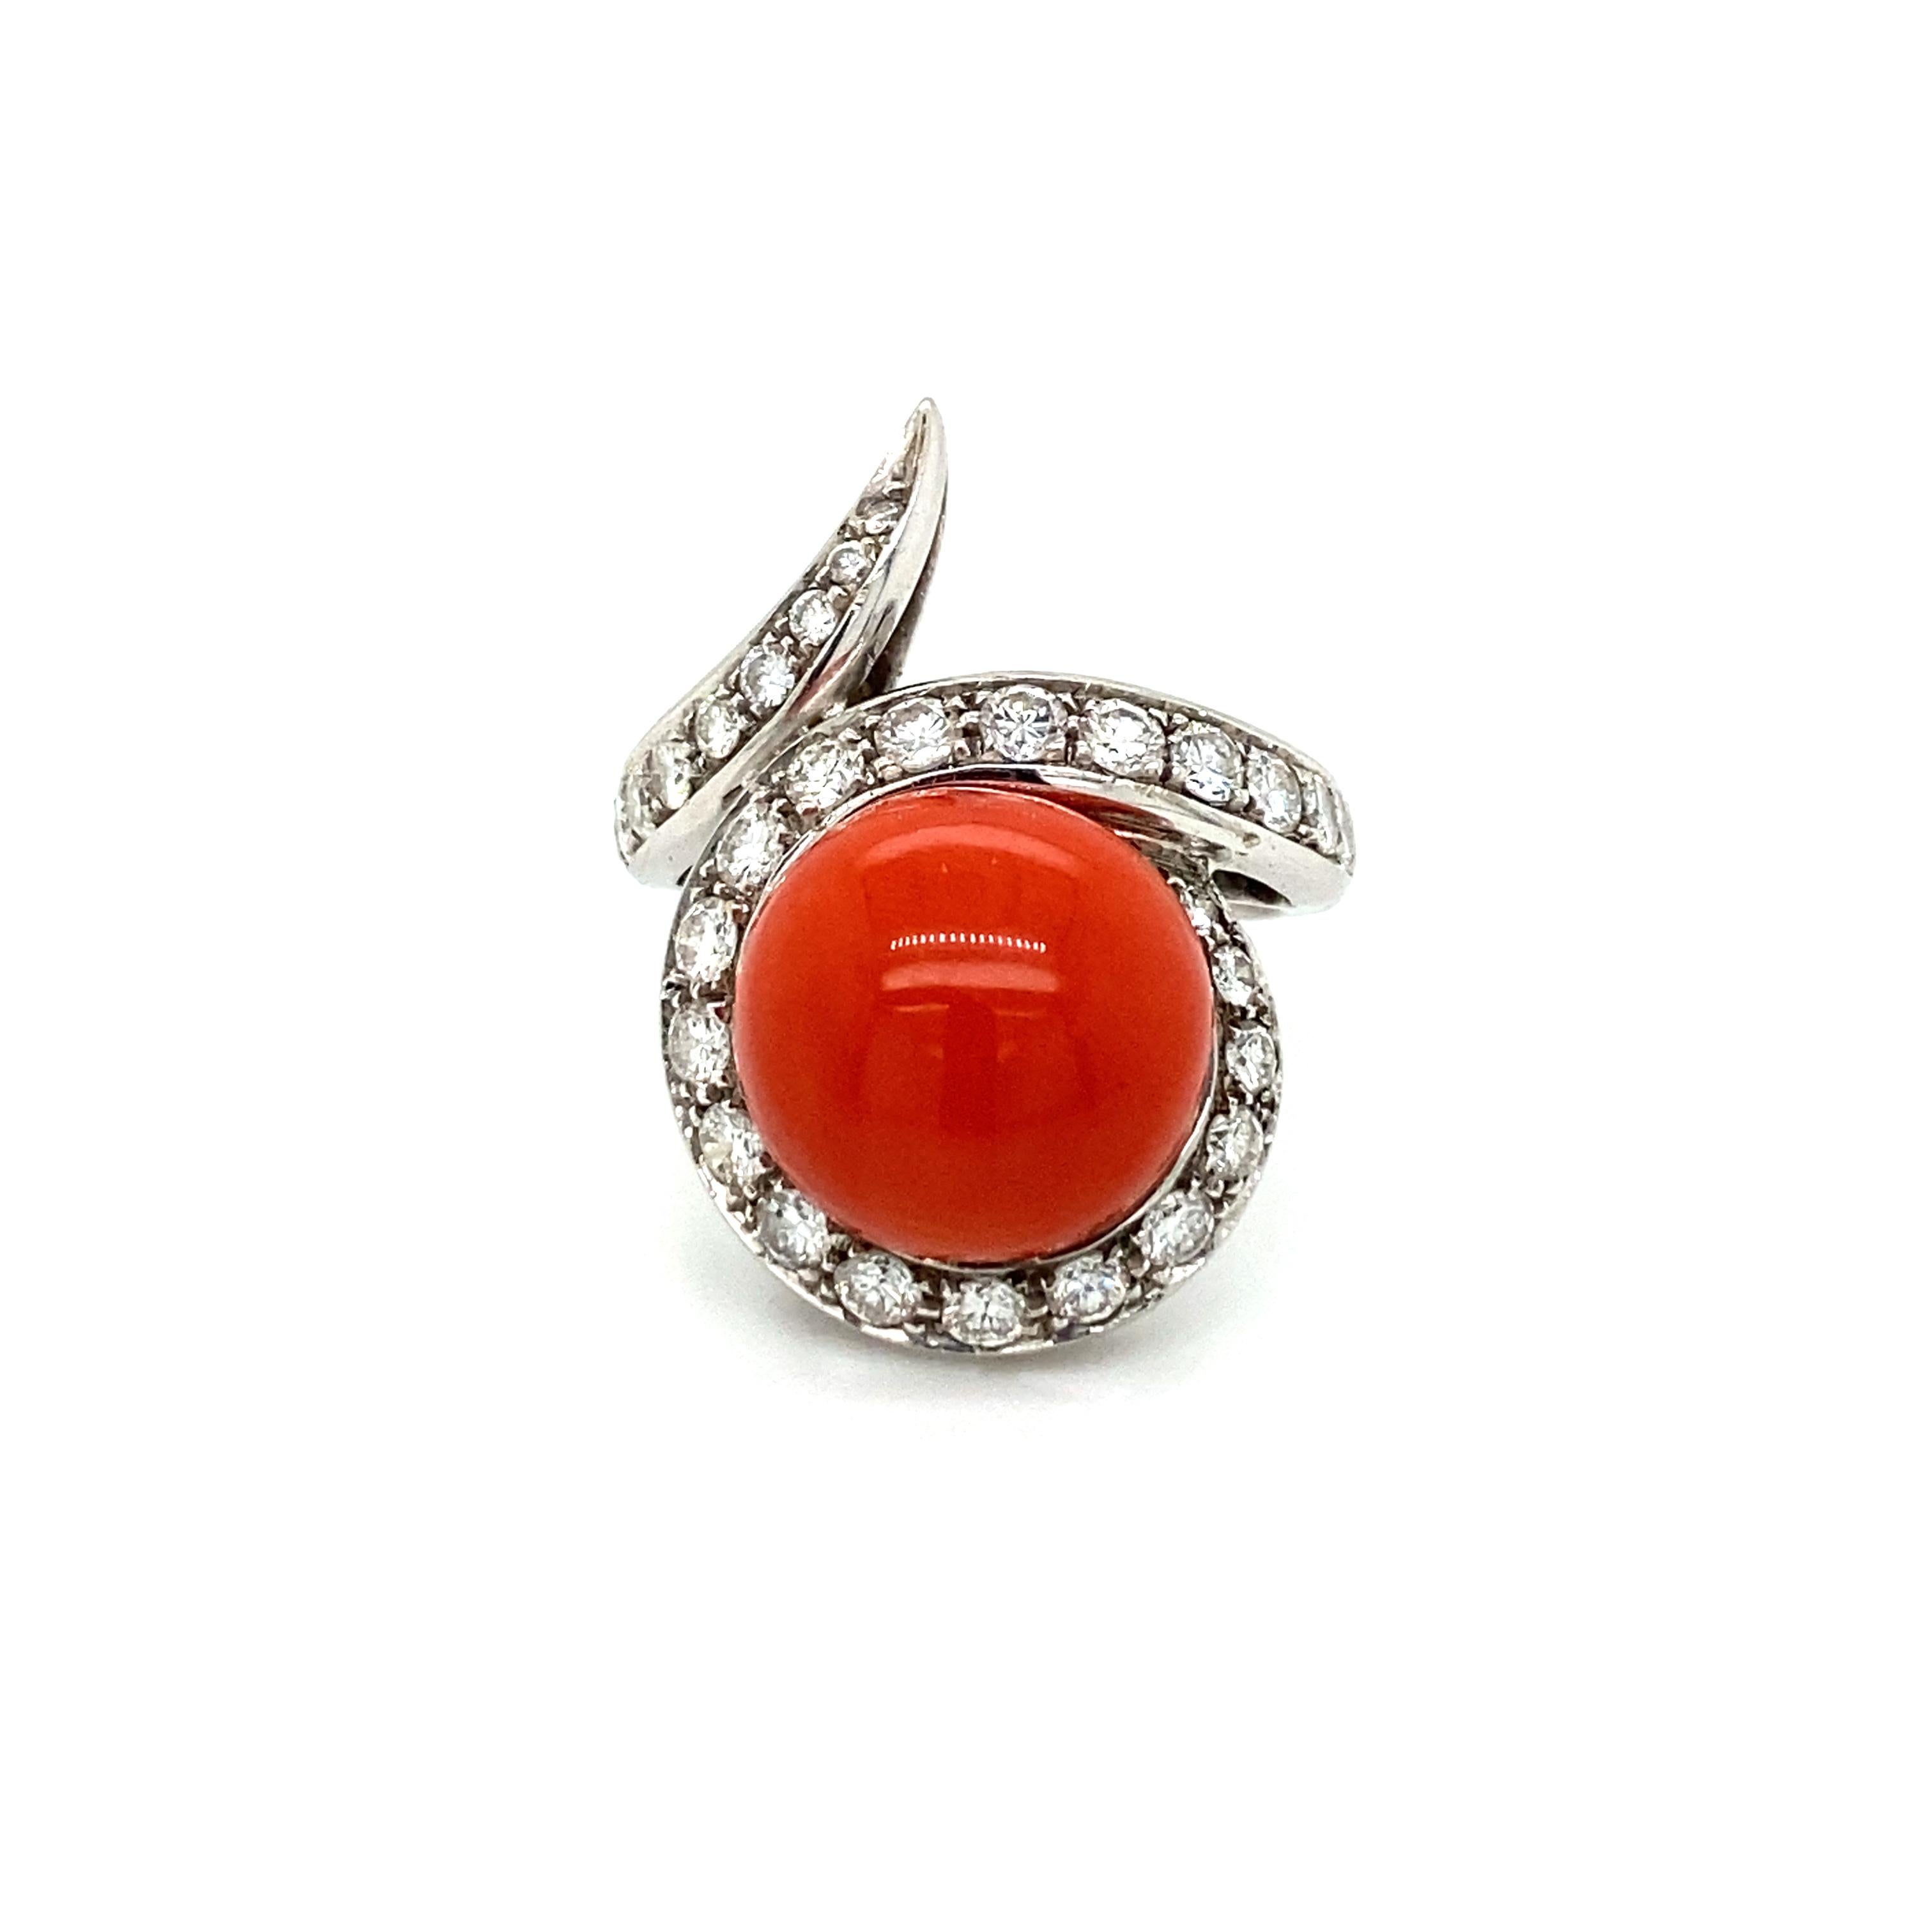 This elegant coral and diamond cocktail ring features a cabochon Natural Mediterranean Coral with a deep Red color, no imperfection or scratches, surrounded by round brilliant cut diamonds totaling approximately 1.50 carat G color VVS clarity. Circa